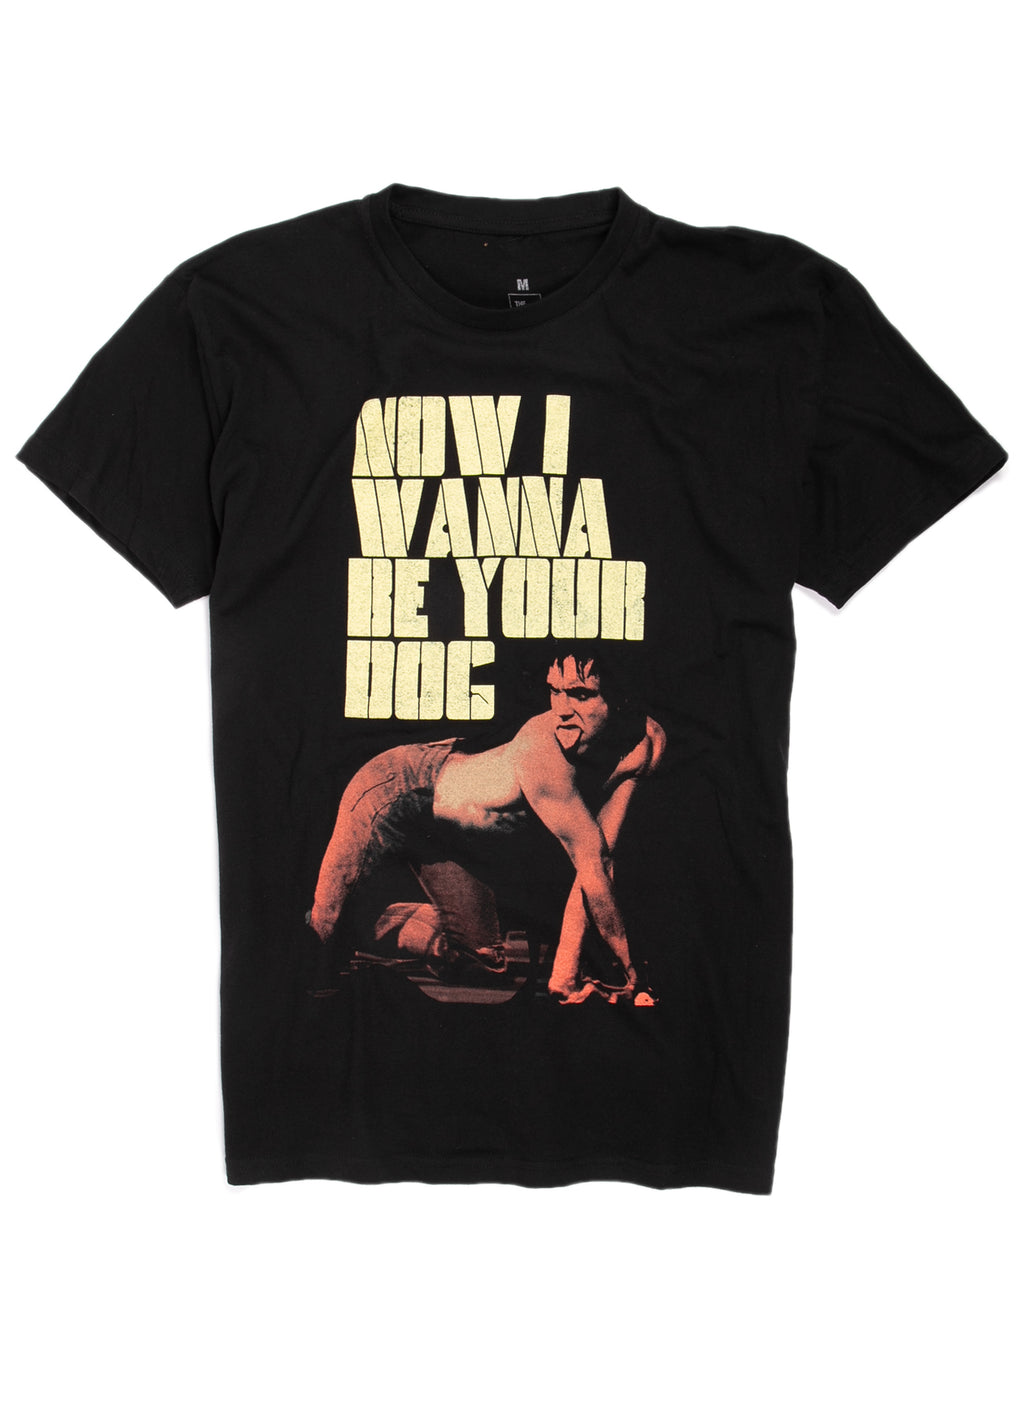 The Stooges "Now I Wanna Be Your Dog" t-shirt.